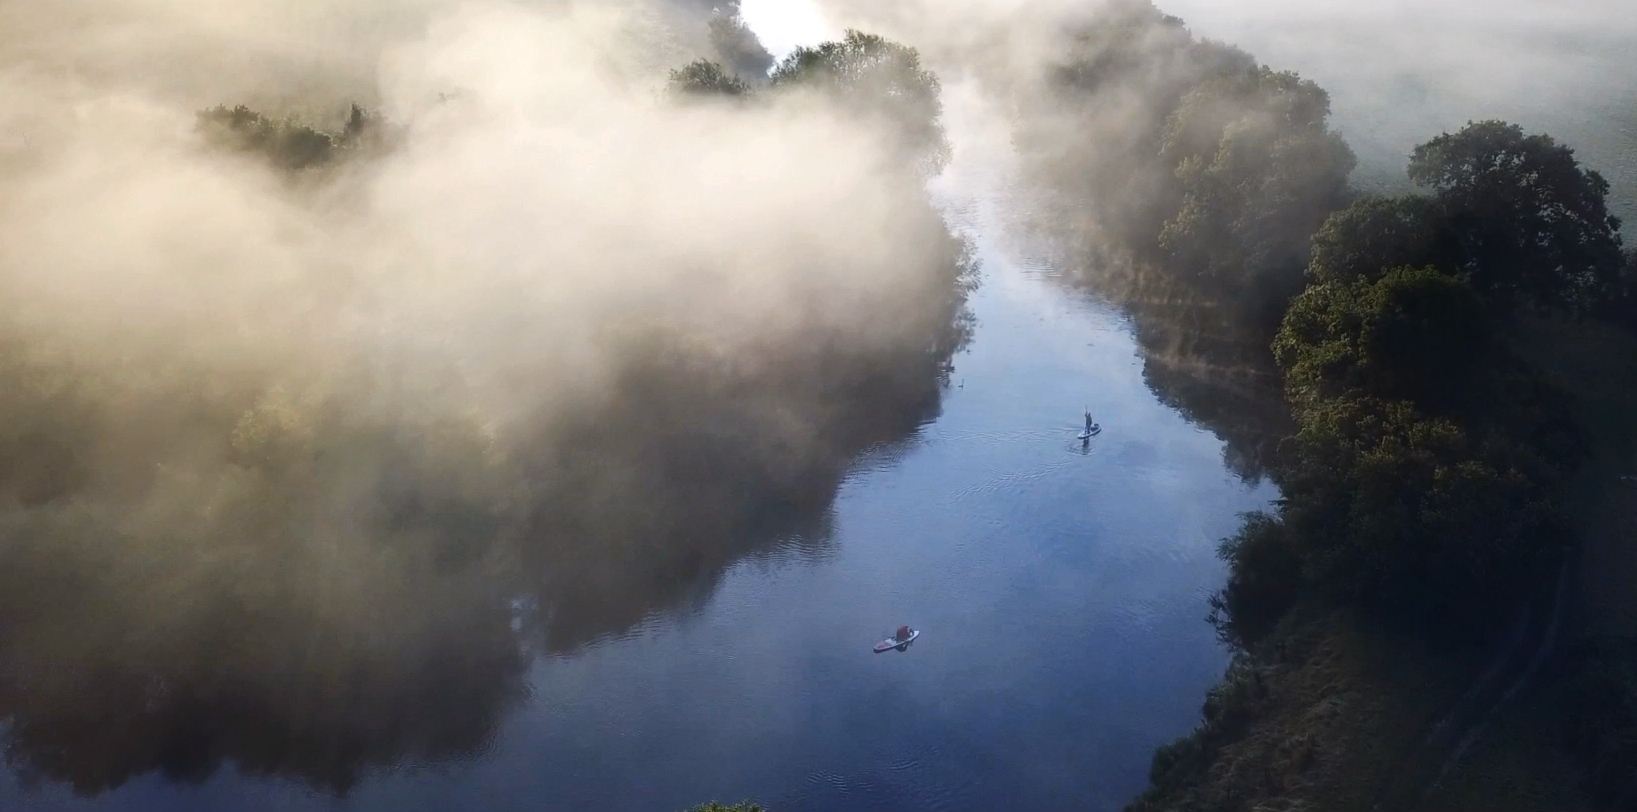 paddleboarding down the river on a misty morning 